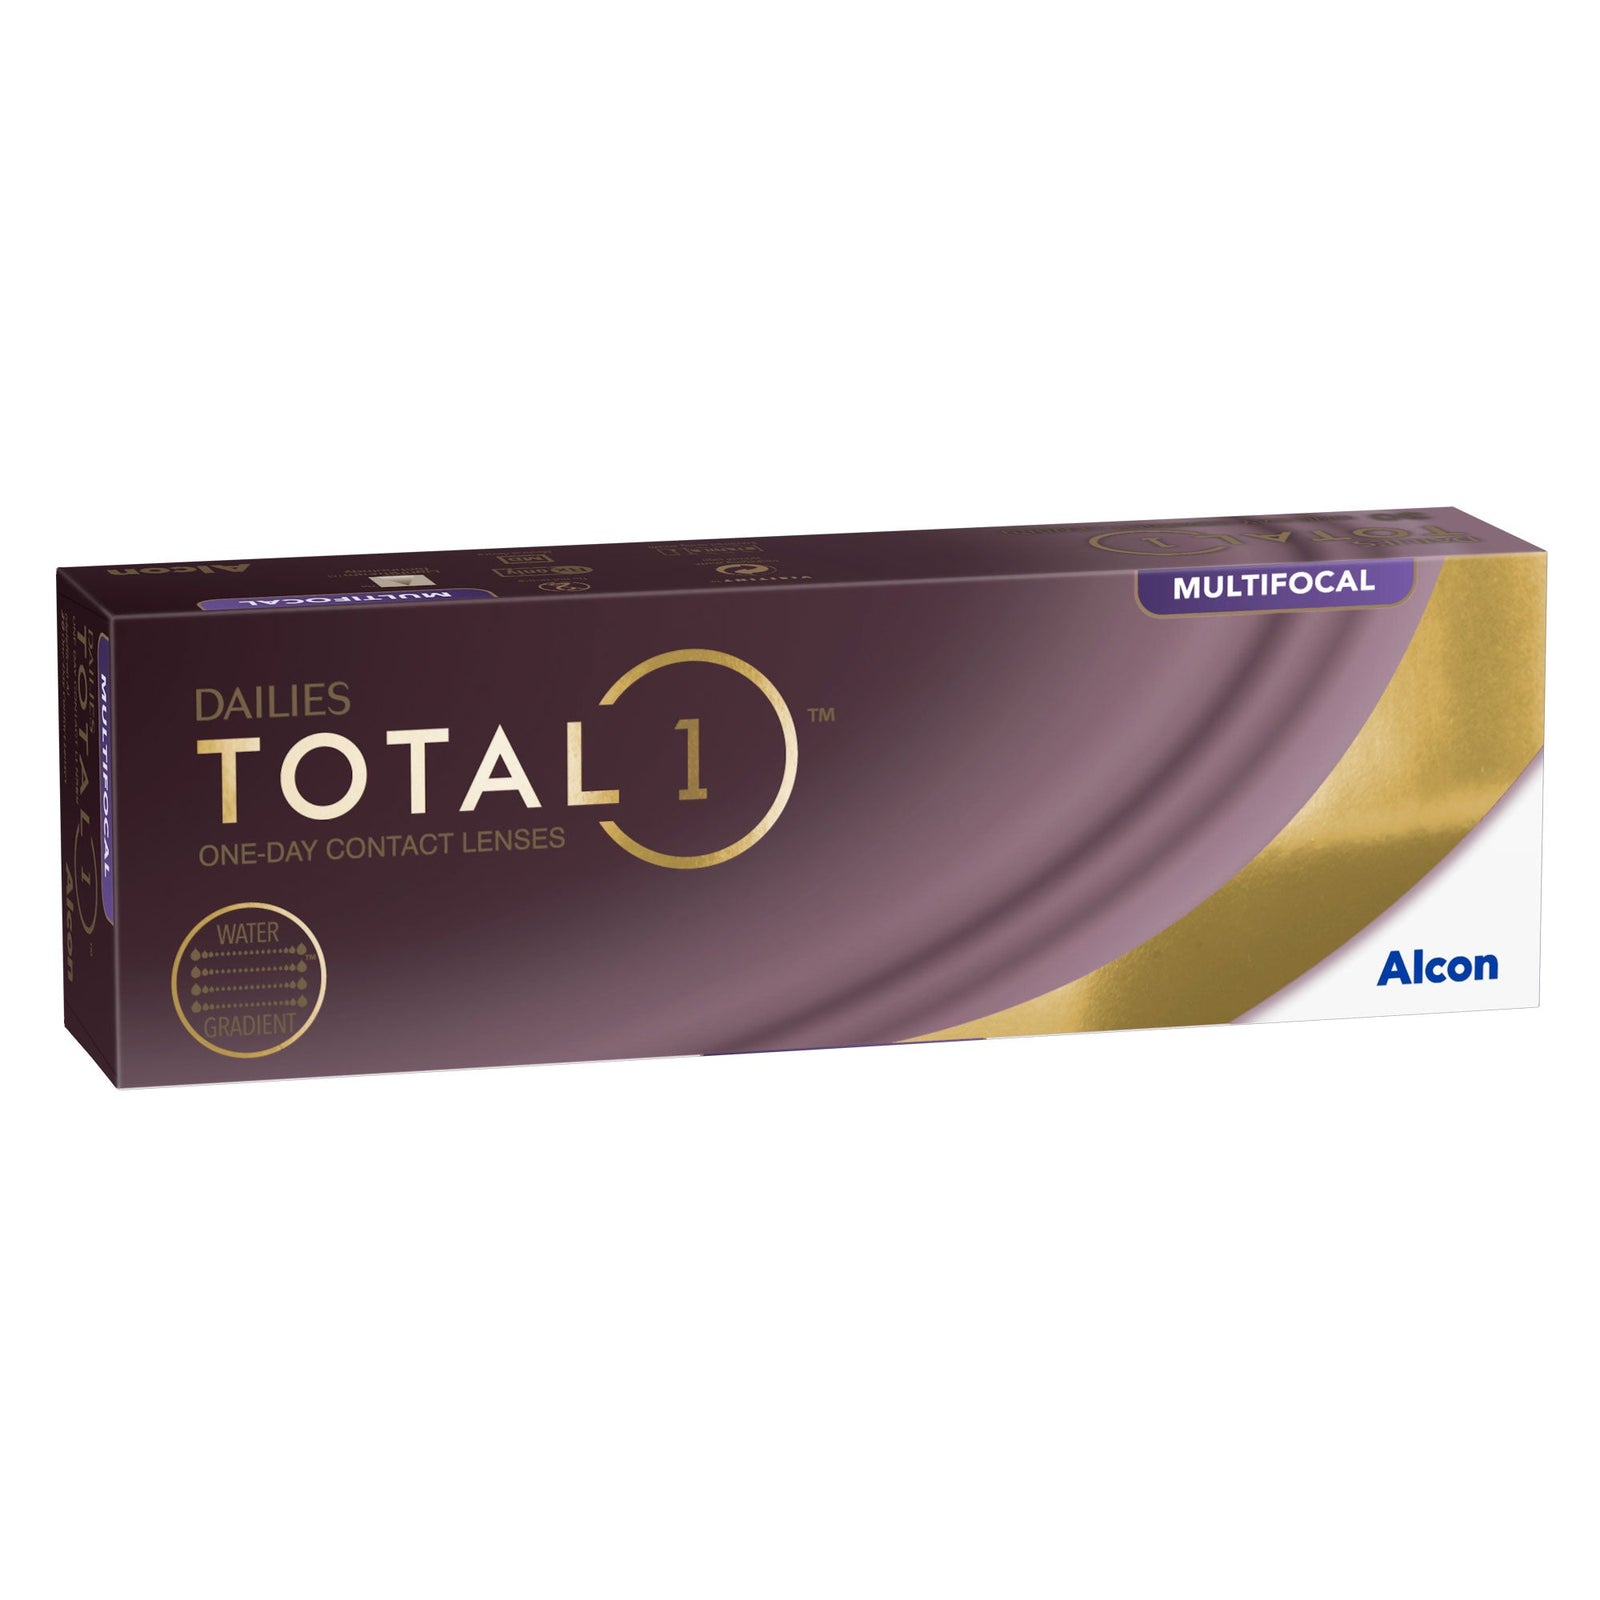 DAILIES : TOTAL1™ Multifocal Contact Lenses – 4 Month Supply